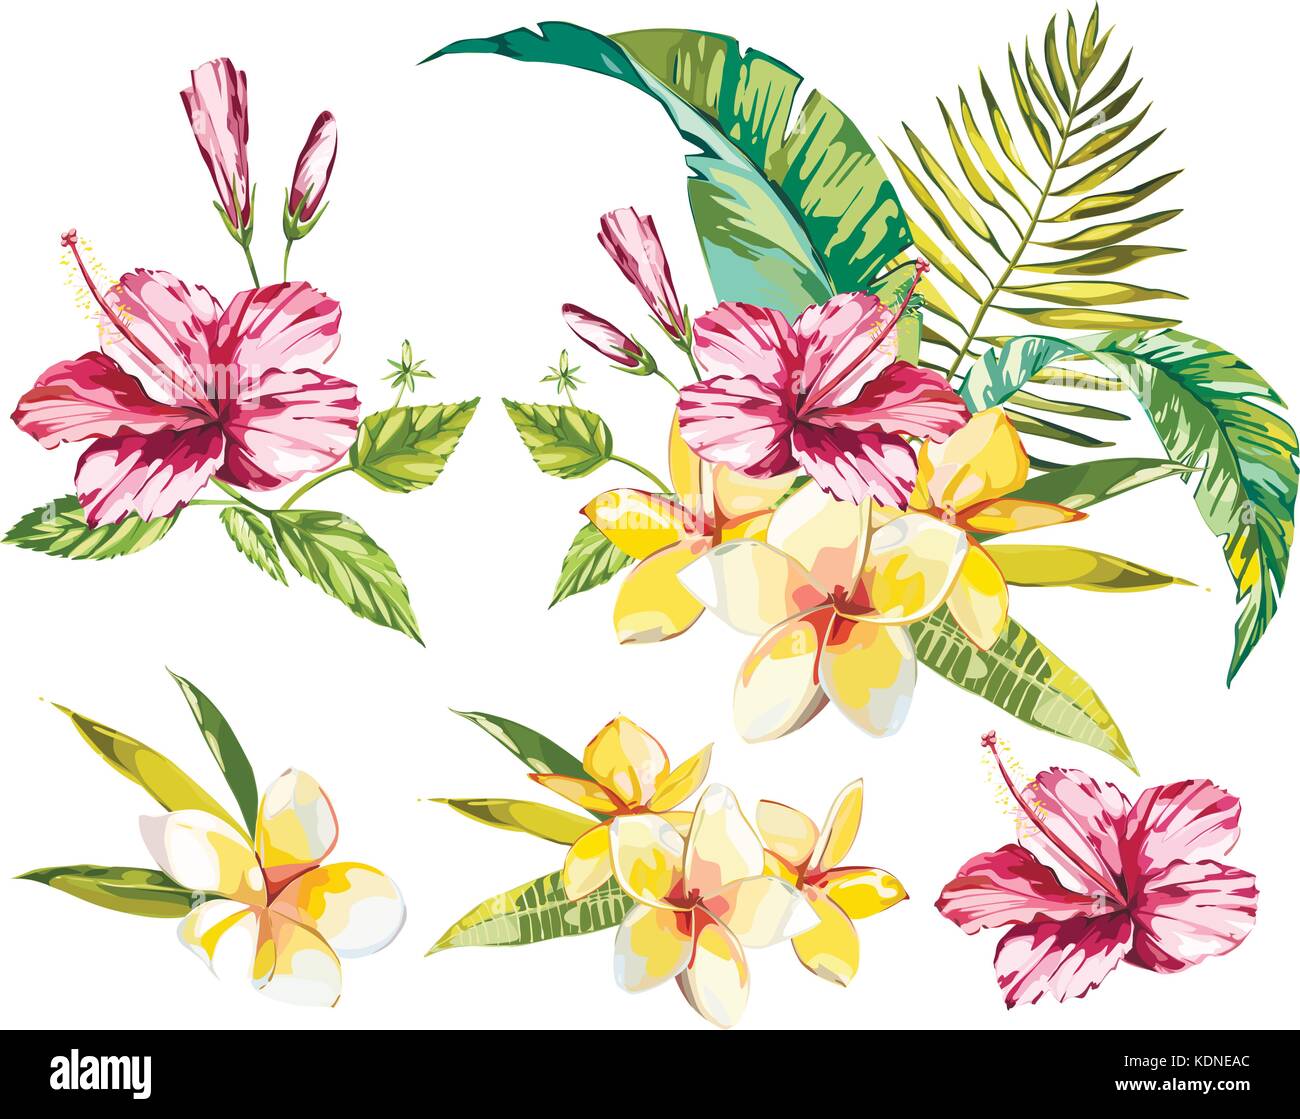 Big Set Watercolor collection with tropical plants elements - leaf, flowers. Botanical illustration isolated on white background. Floral nature. Stock Vector